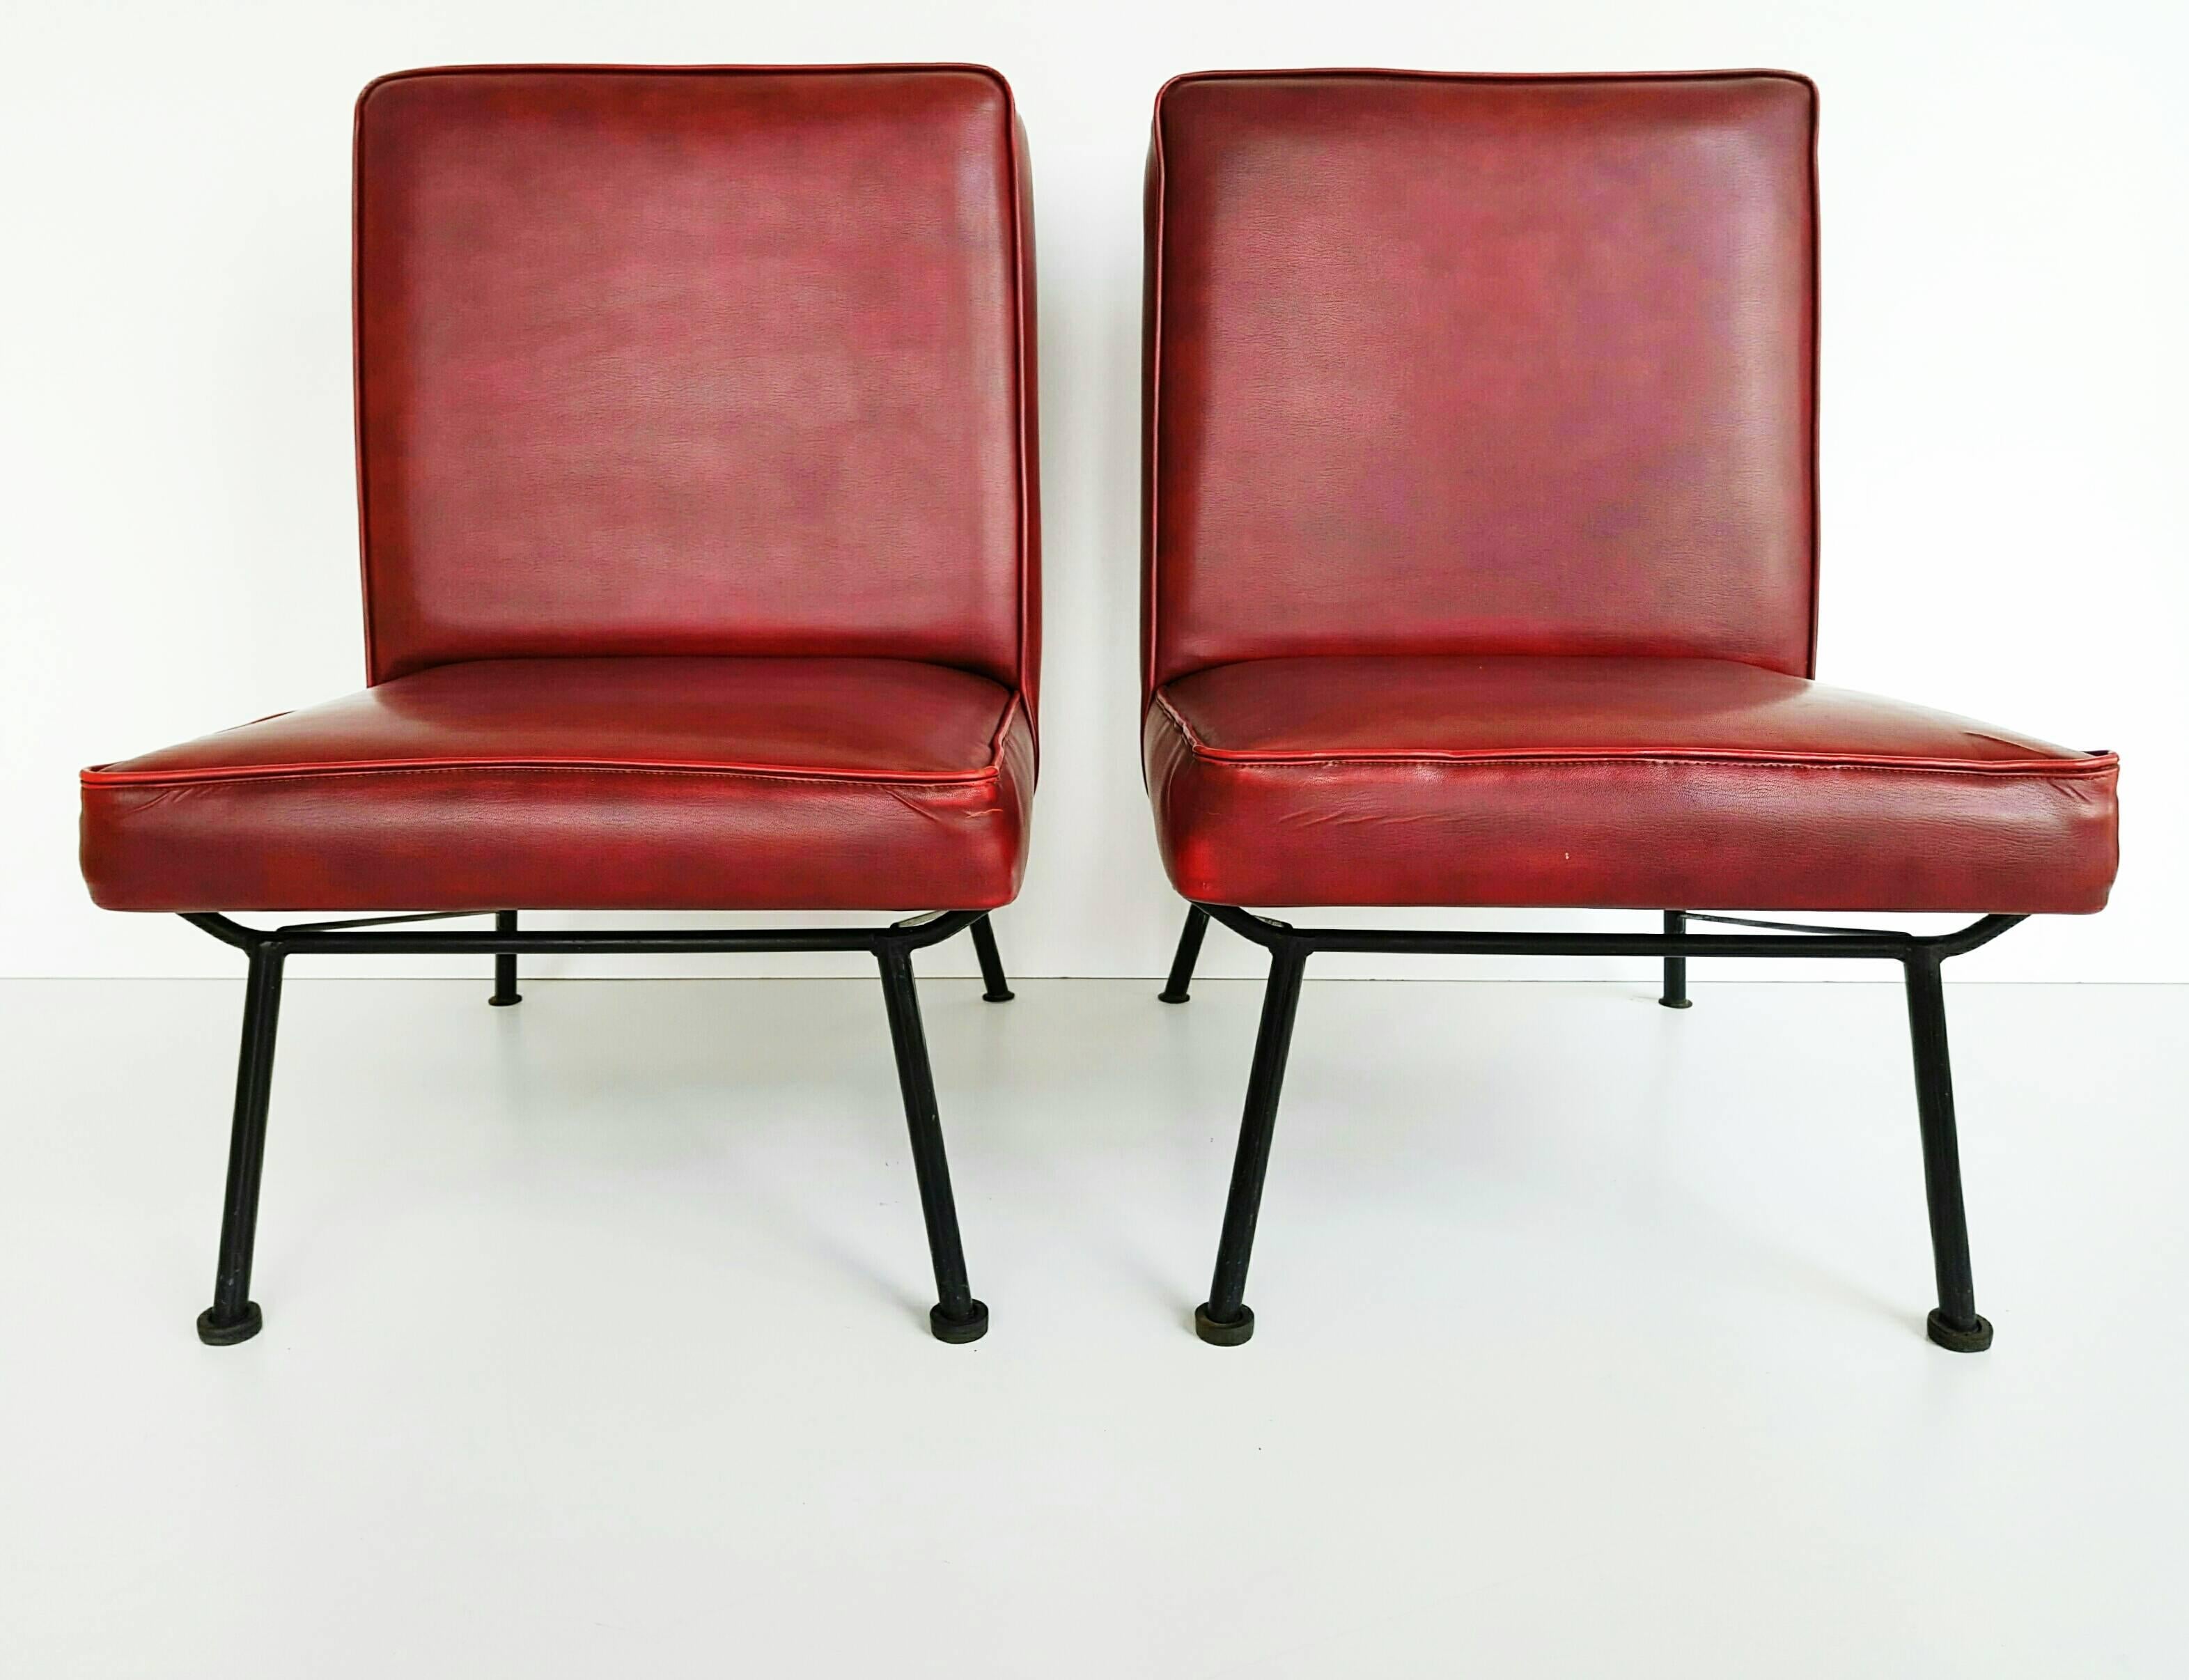 Beautiful pair of French lounge chairs manufactured in 1950s, with is original burgundy leatherette, in very good vintage condition. Very nice iron base.